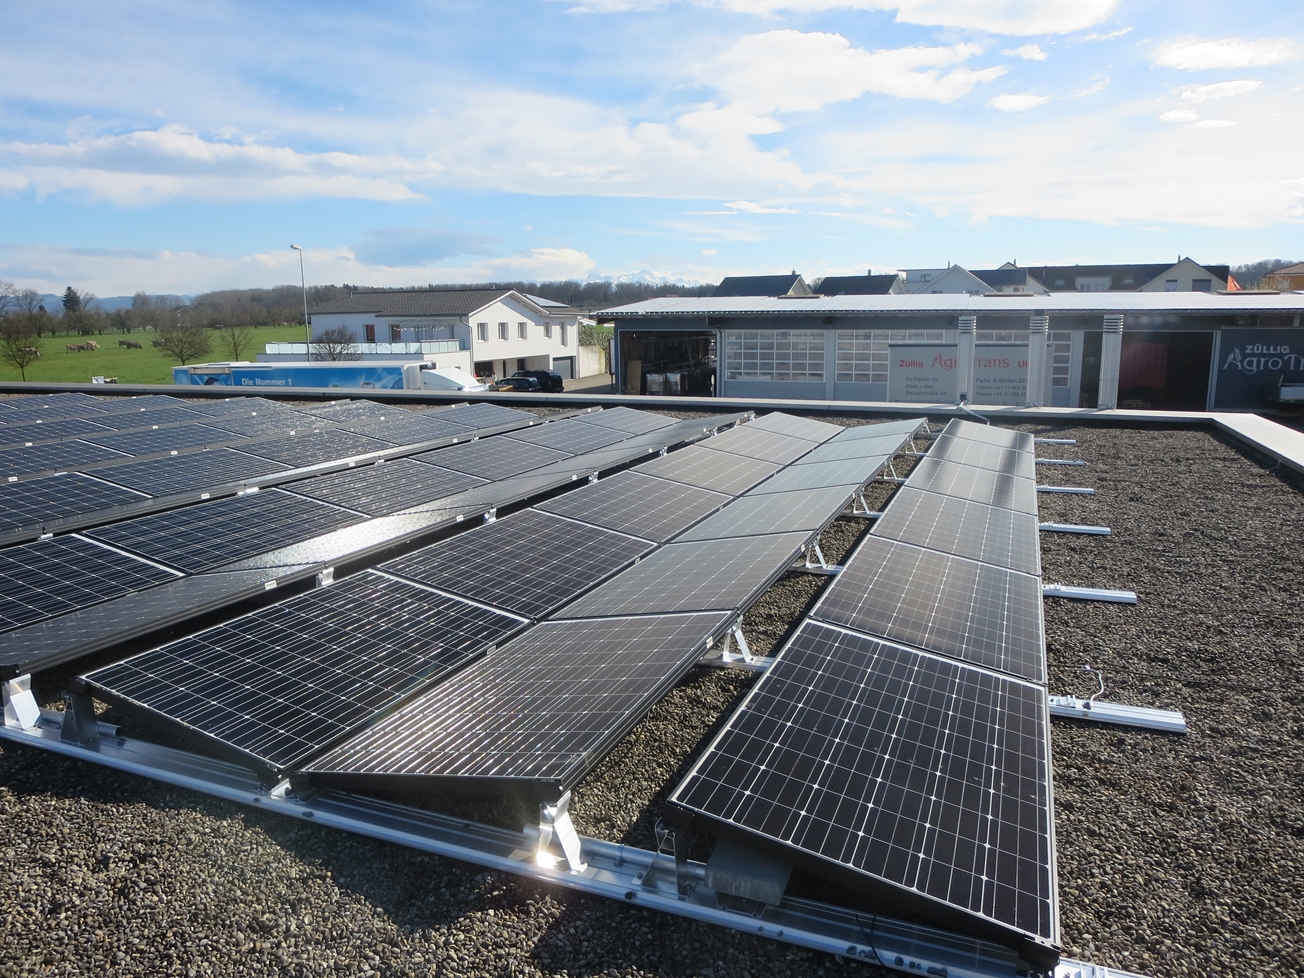 A new photovoltaic installation at VitaPlant